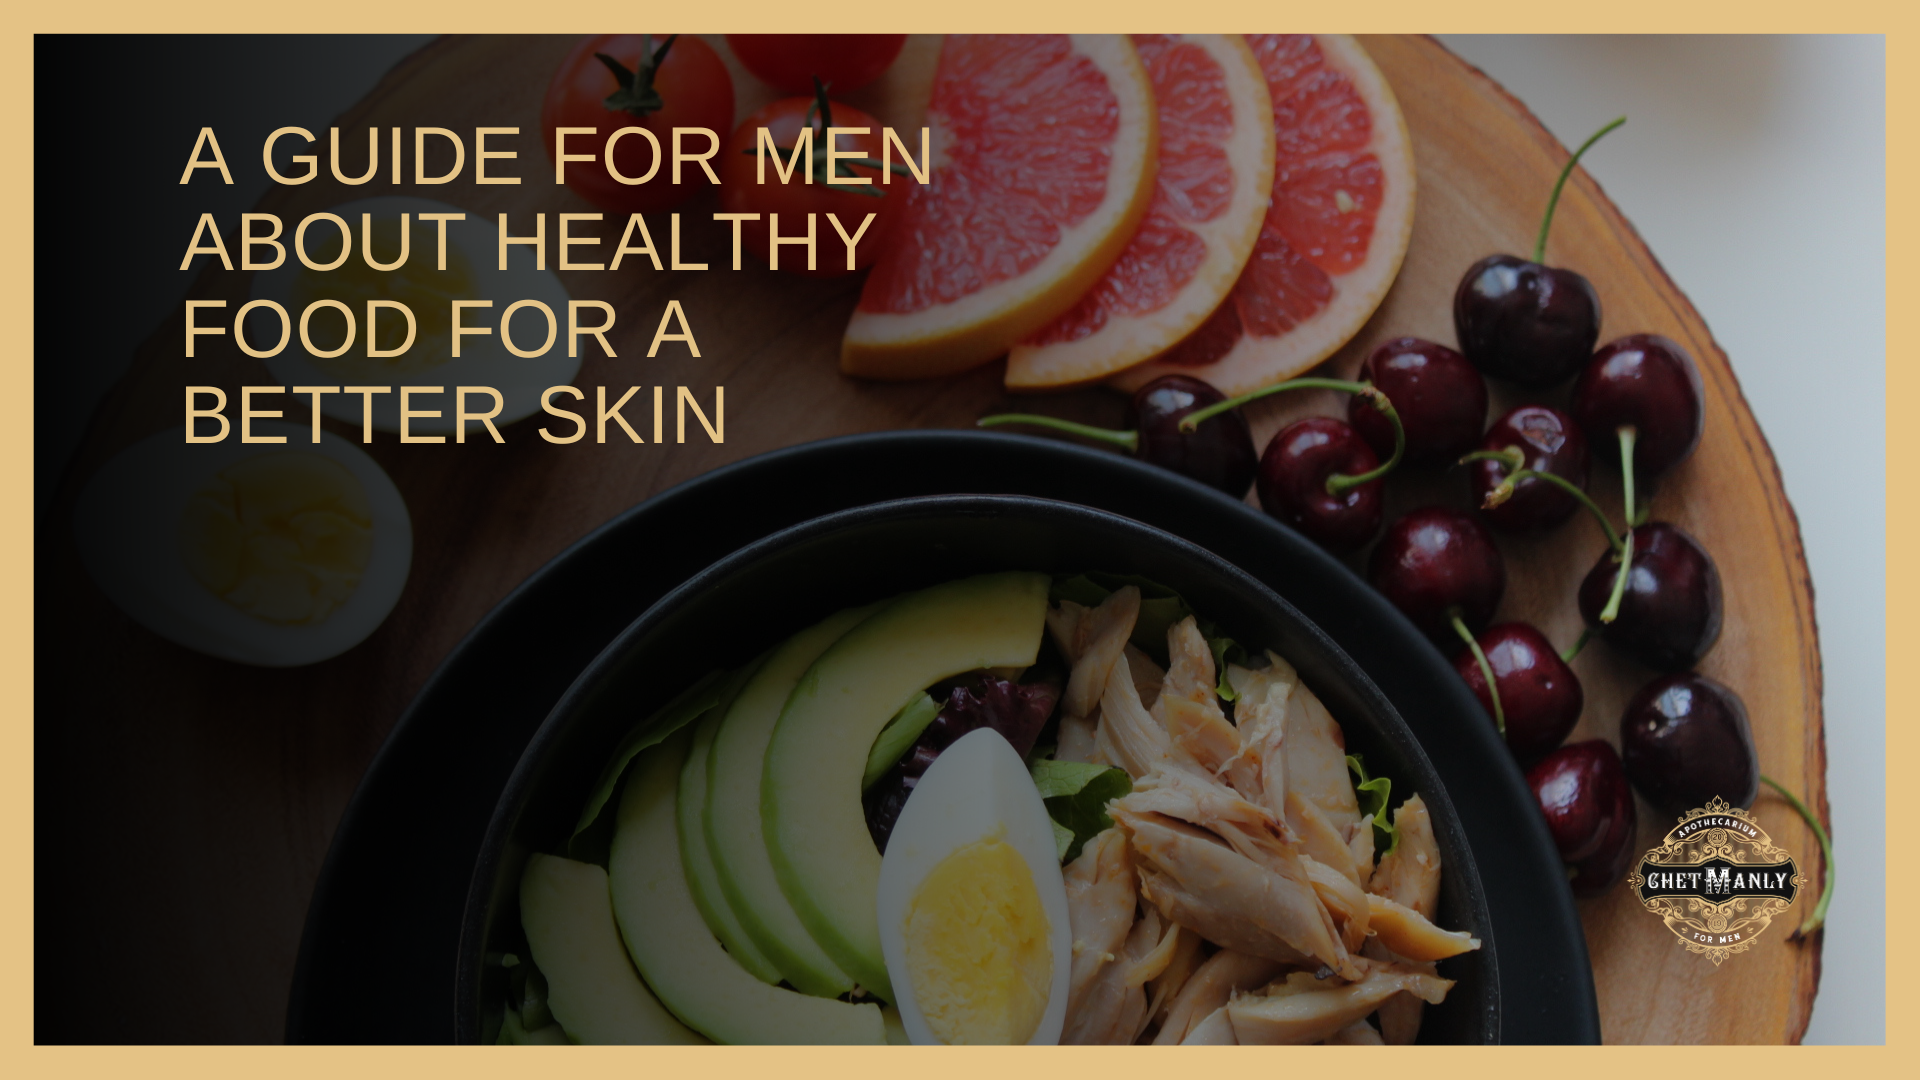 A Guide for Men About Healthy Food For a Better Skin